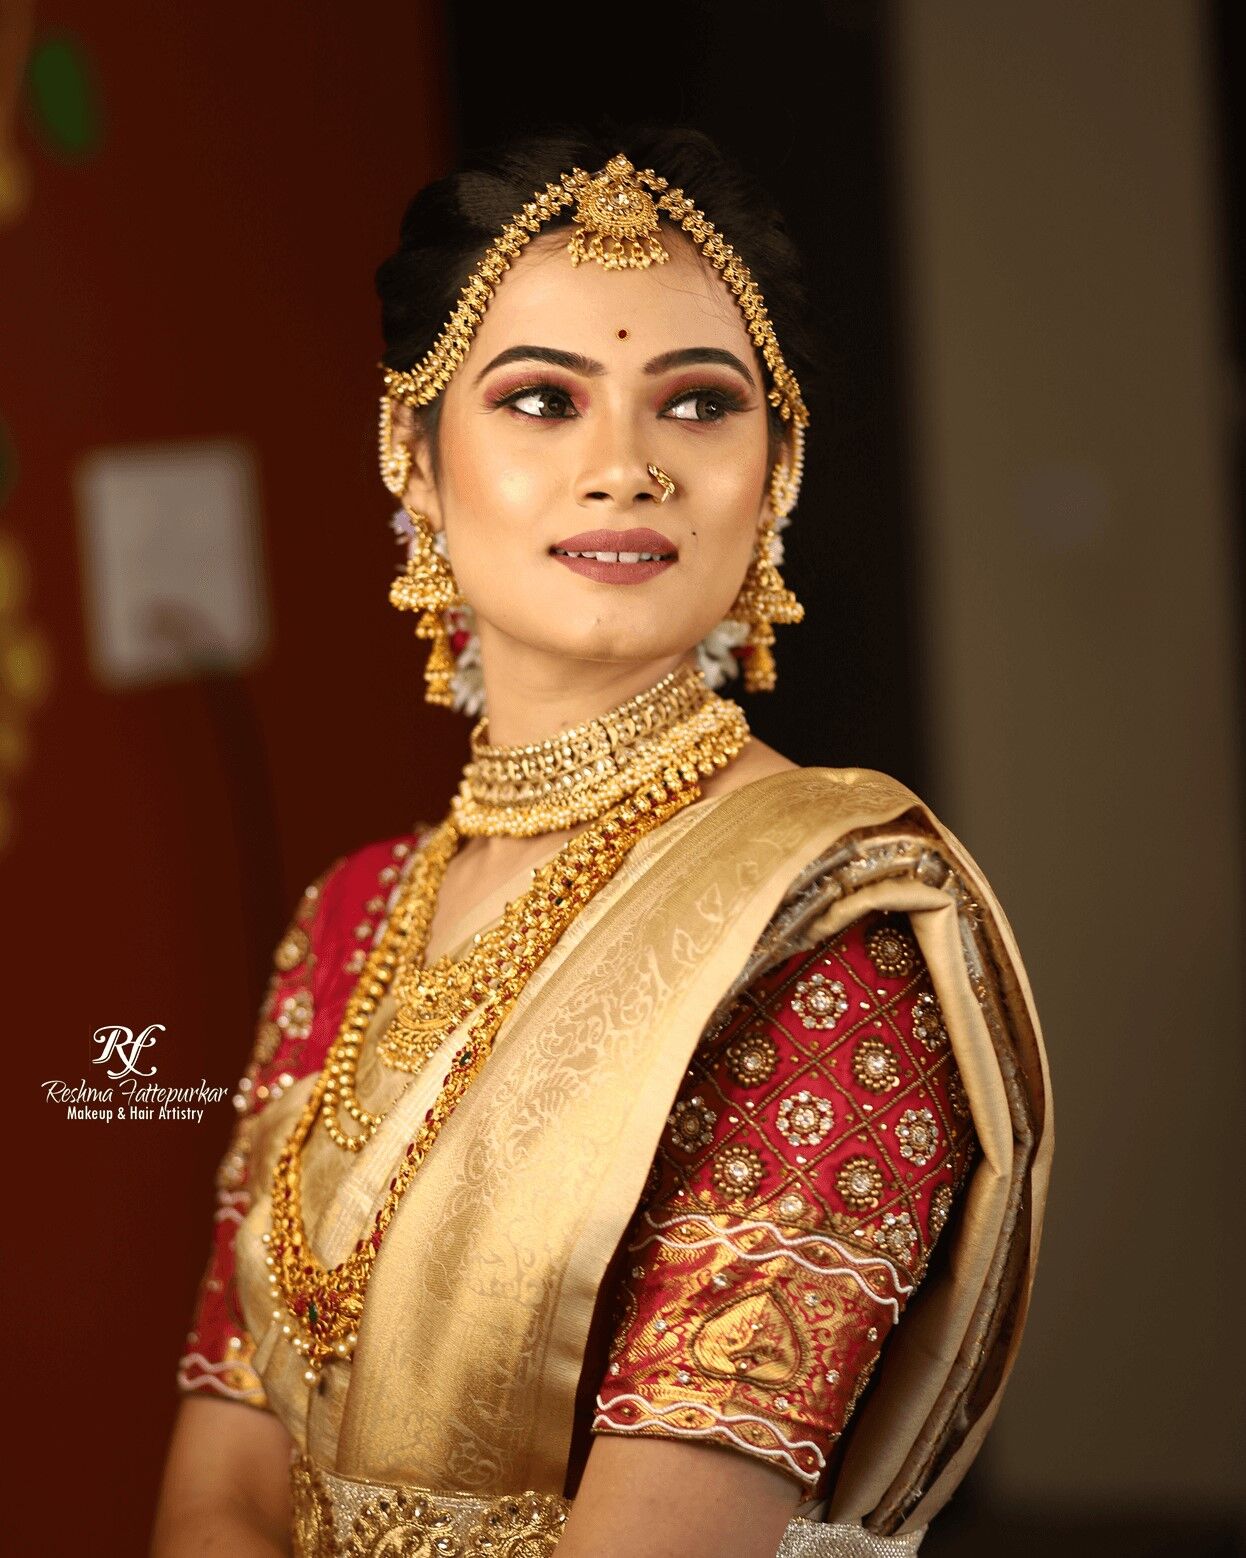 South Indian Bridal Front Hairstyles #SouthIndian #BridalHairstyle | Indian  bridal hairstyles, Indian bride hairstyle, South indian wedding hairstyles